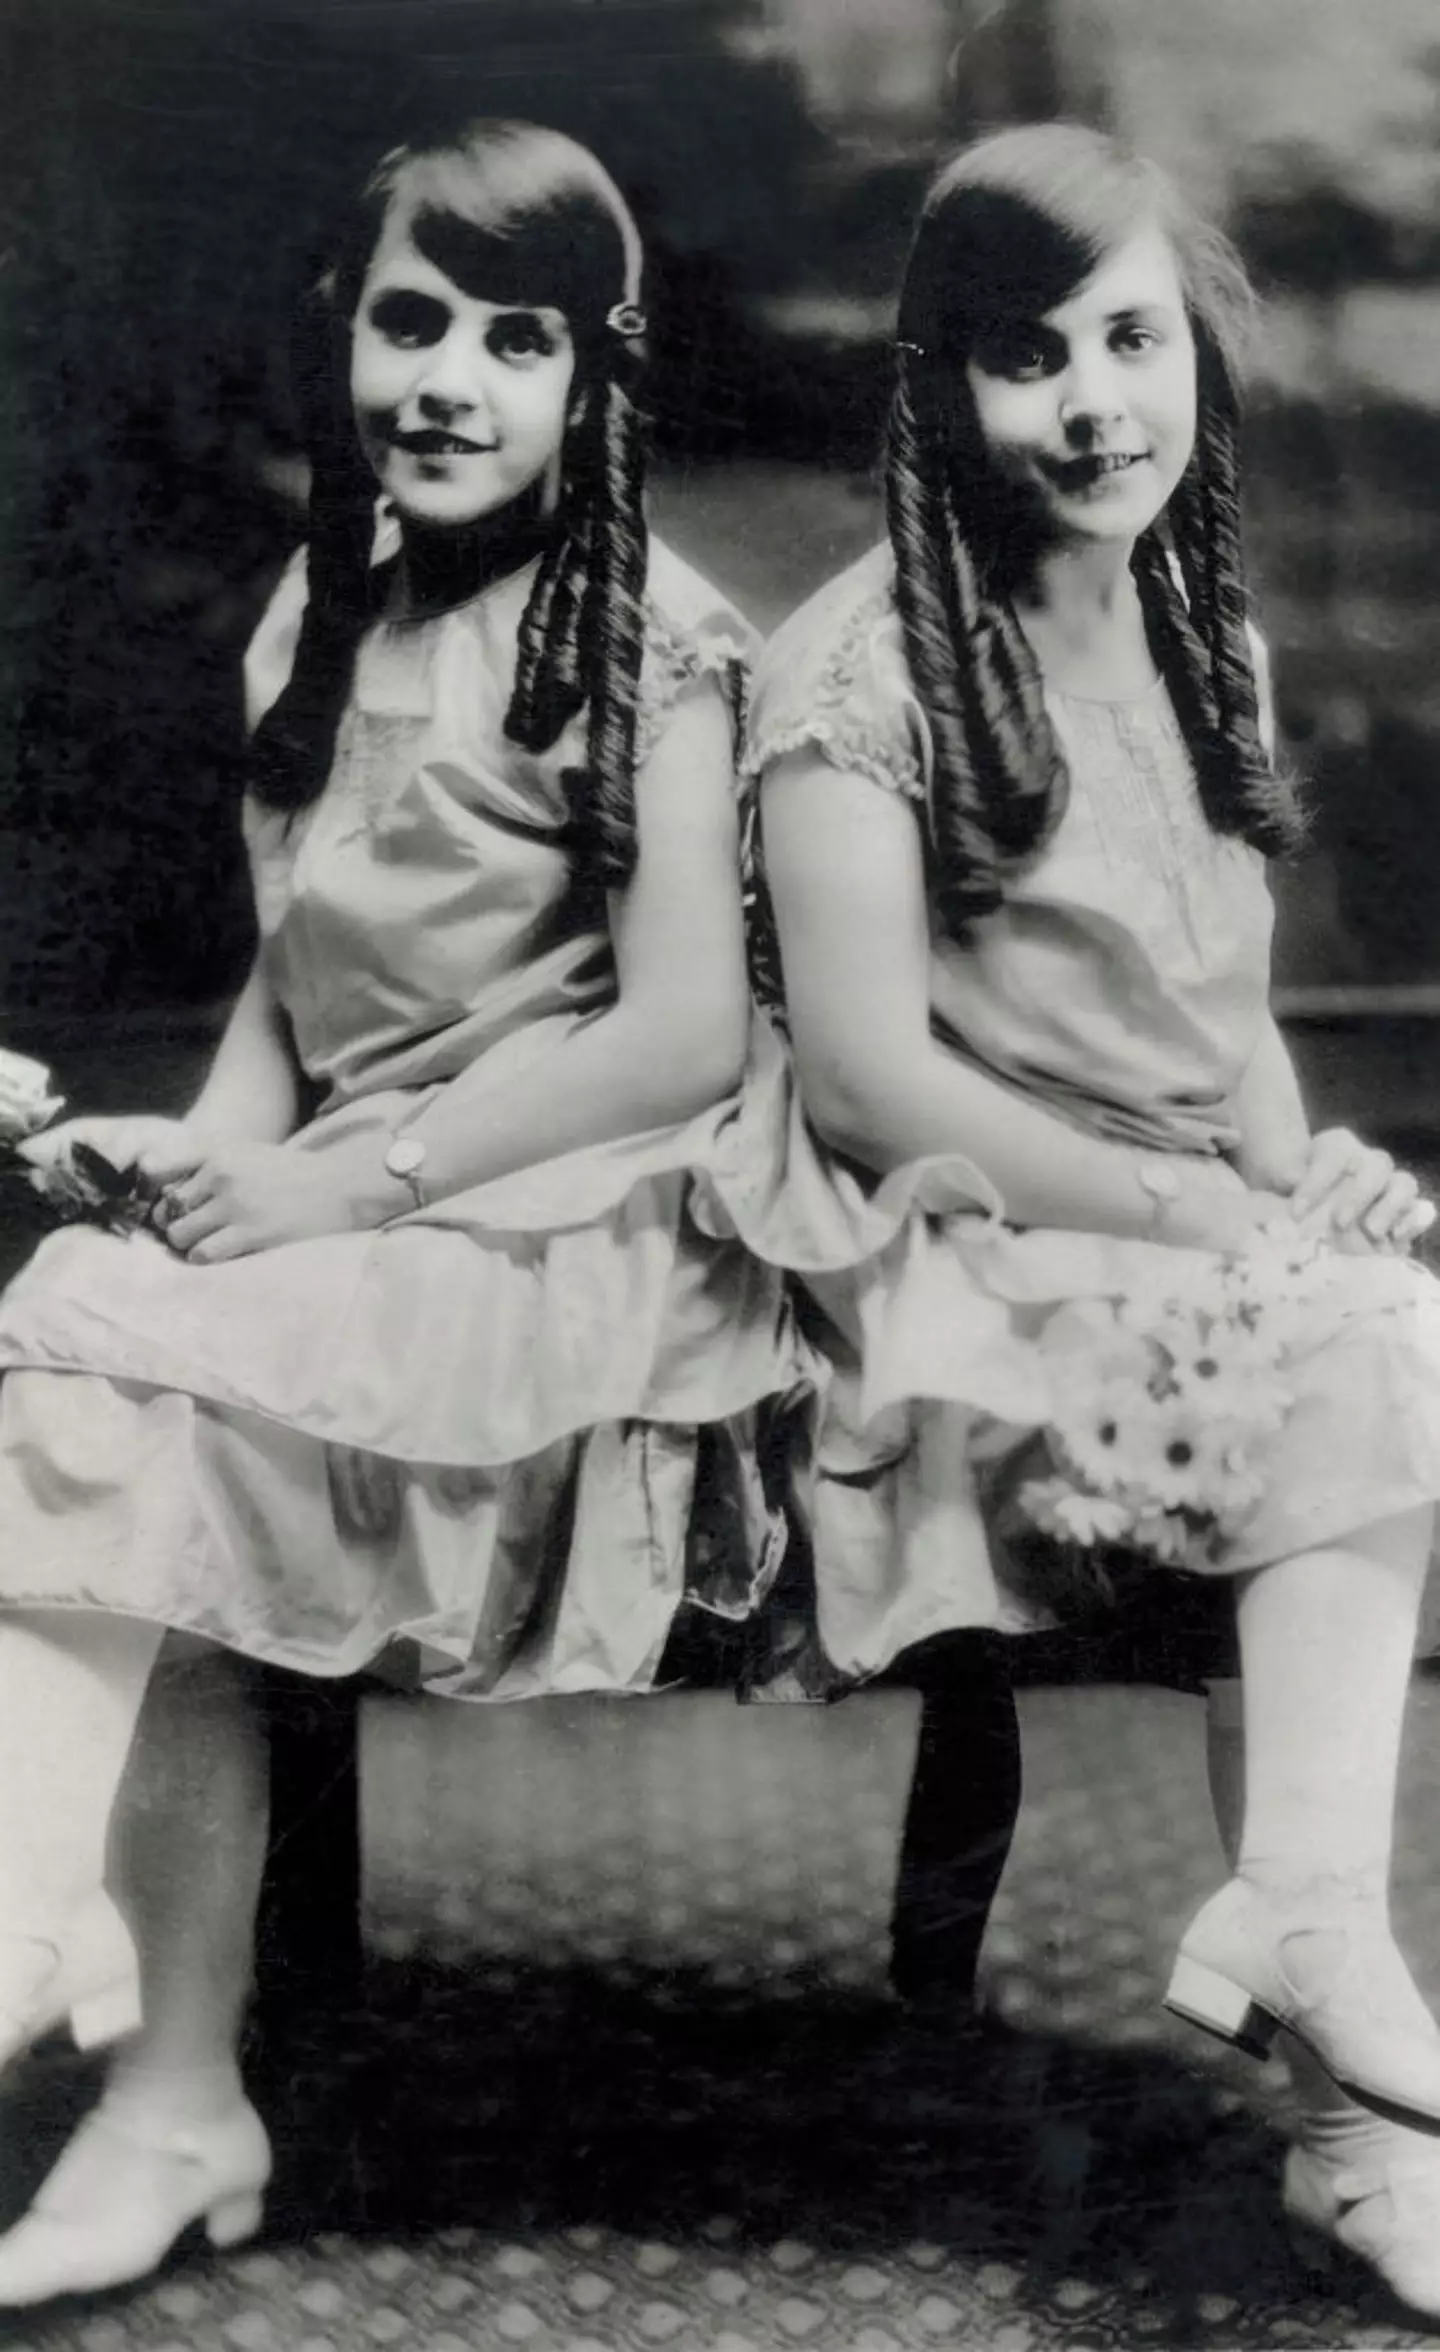 The twins pictured in 1924. (Universal History Archive/Universal Images Group via Getty Images)